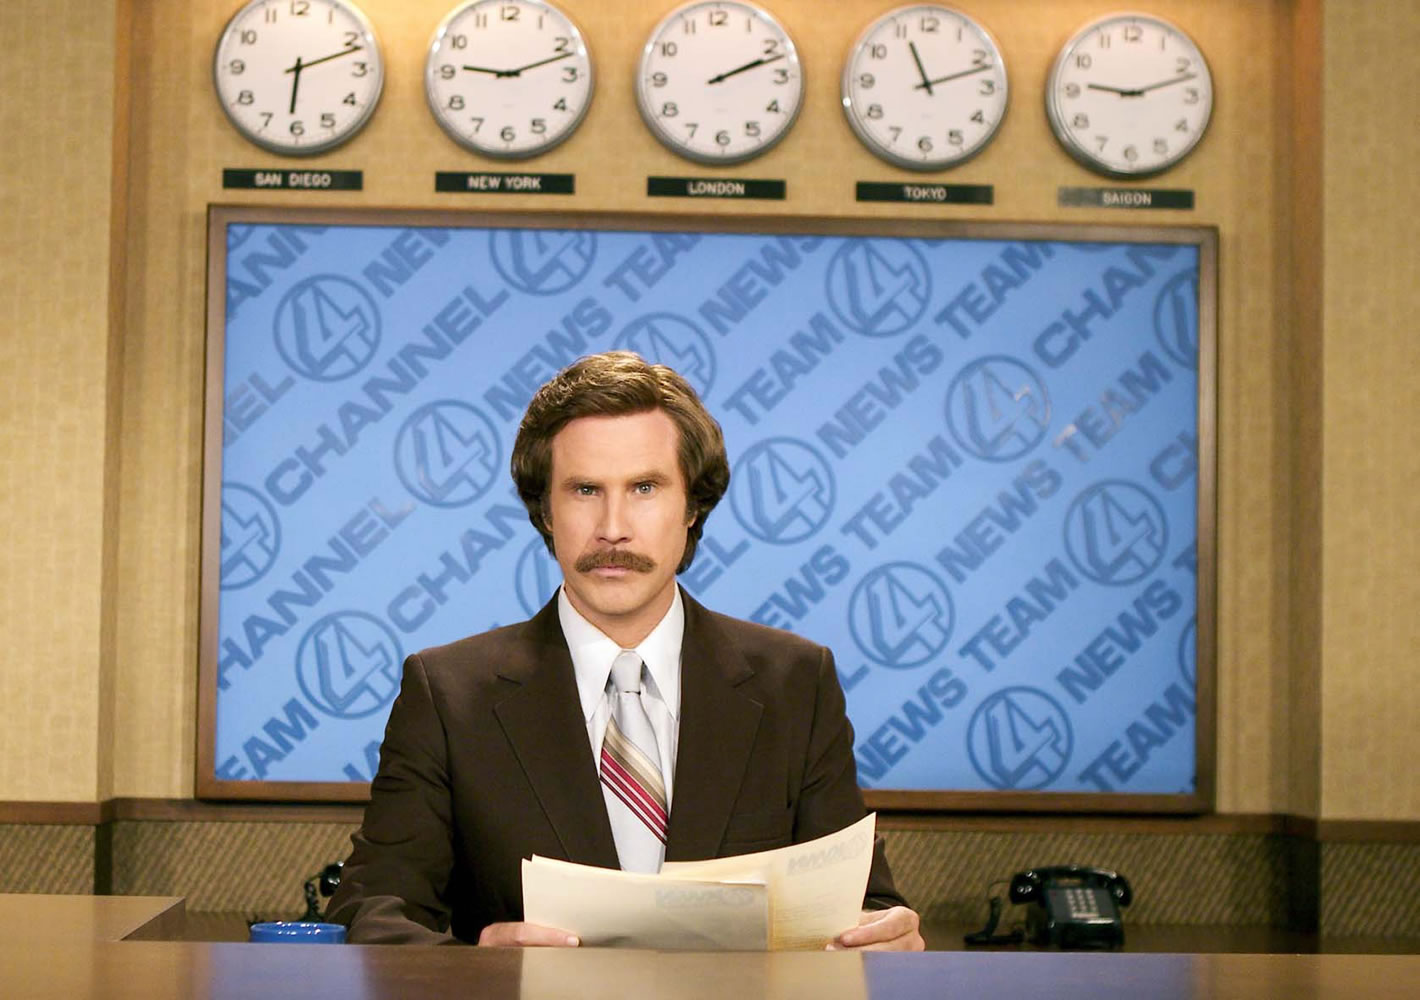 In 2004's &quot;Anchorman: The Legend of Ron Burgundy,&quot; Will Ferrell portrays Ron Burgundy.